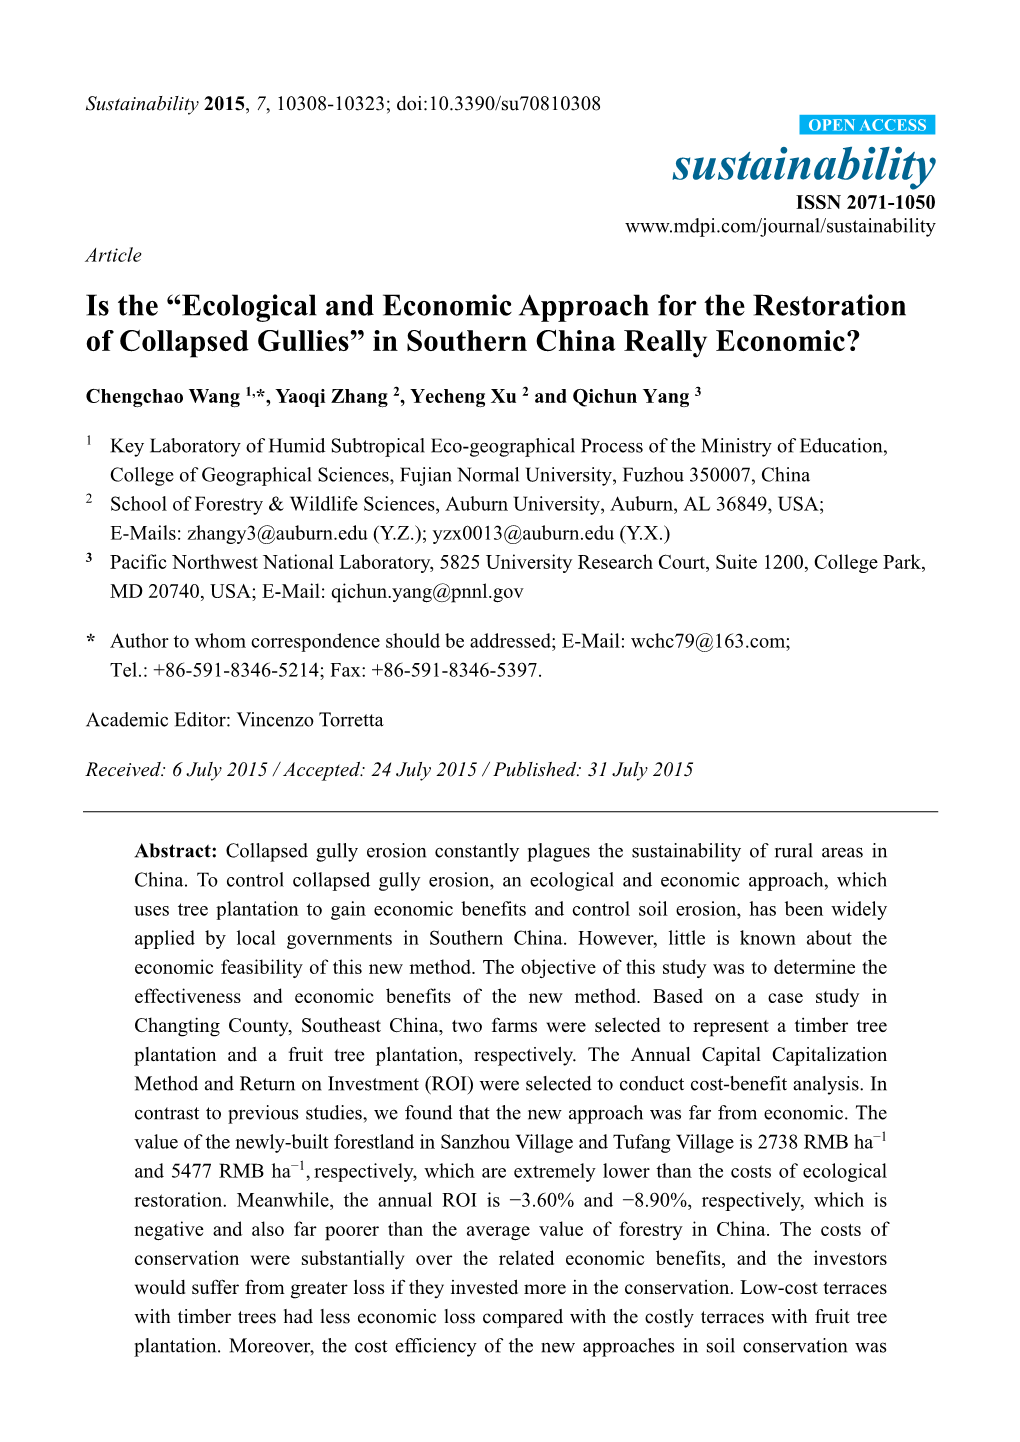 Is the “Ecological and Economic Approach for the Restoration of Collapsed Gullies” in Southern China Really Economic?